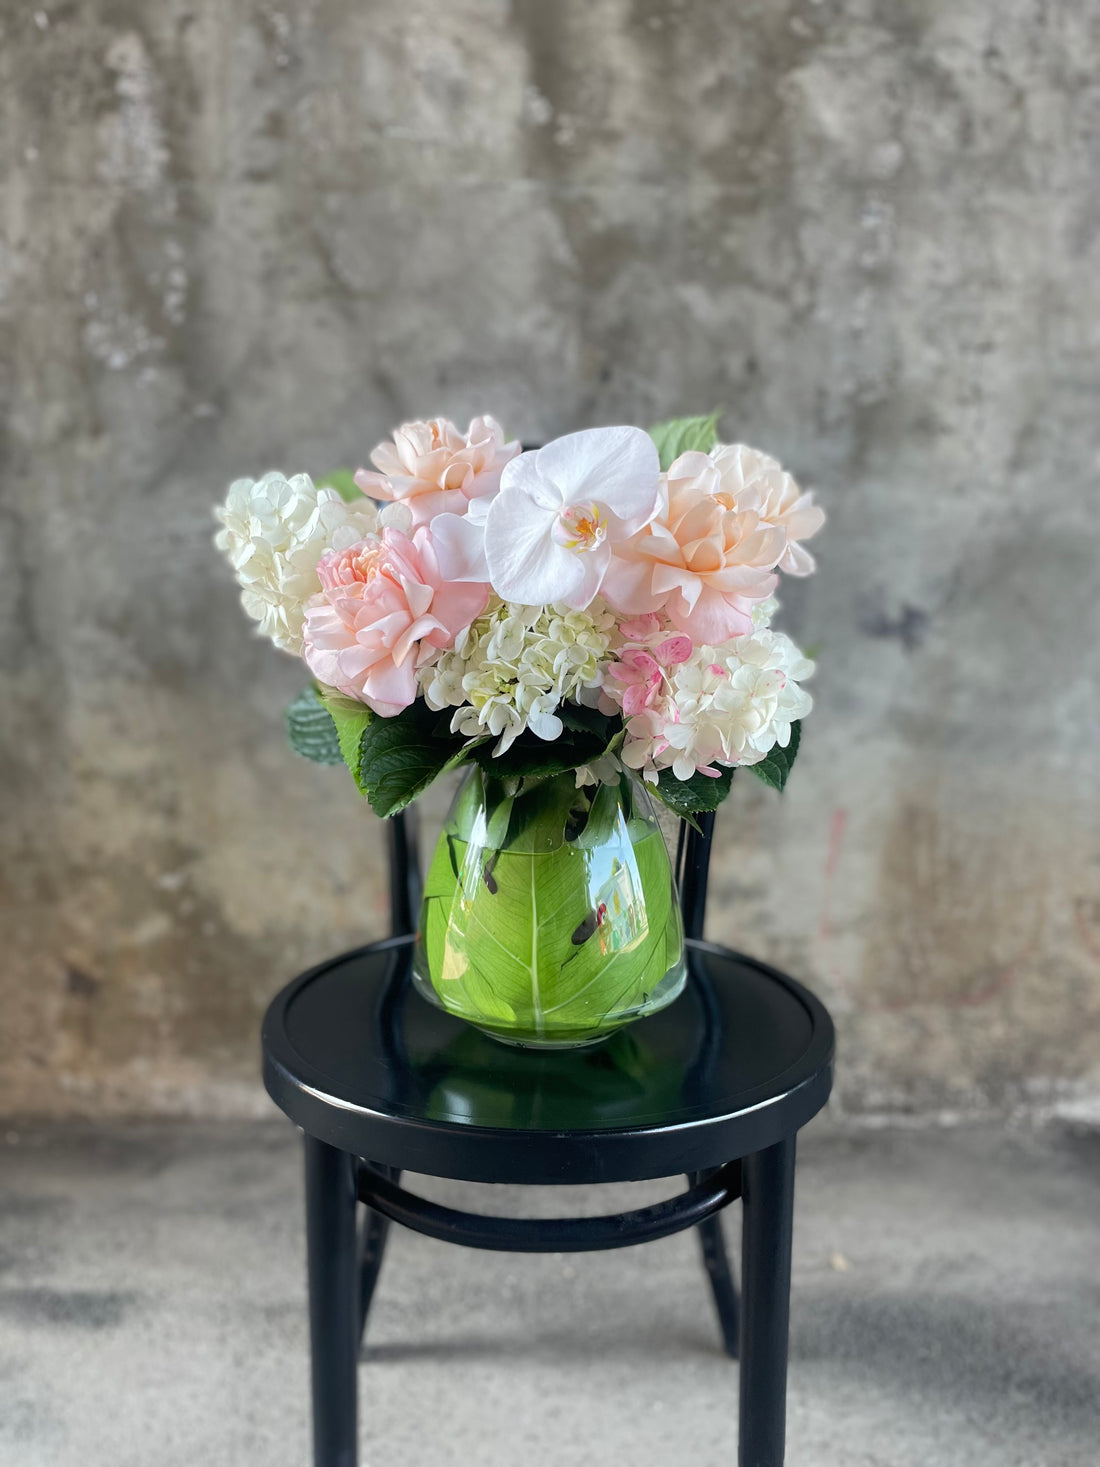 Close up image of Blush white and green flowers displayed in a leaf lined tapered vase, sitting on a black bentwood chair with a concrete wall background.